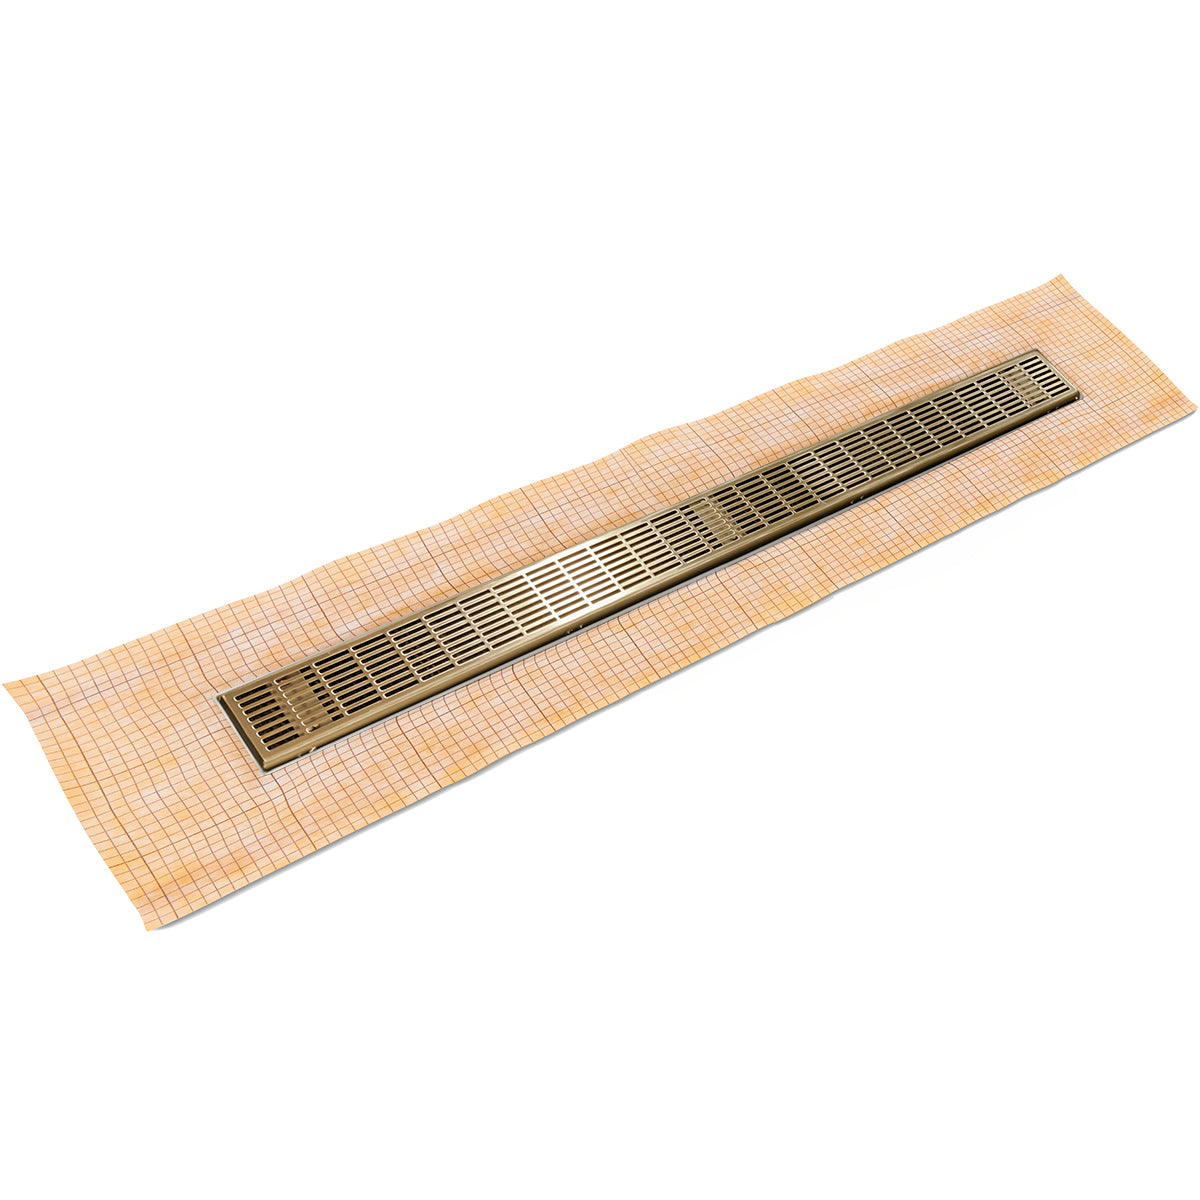 Infinity Drain 42" FCS Series Schluter-Kerdi - Fixed Flange Linear Drain Kit with 2 1/2" Perforated Slotted Grate